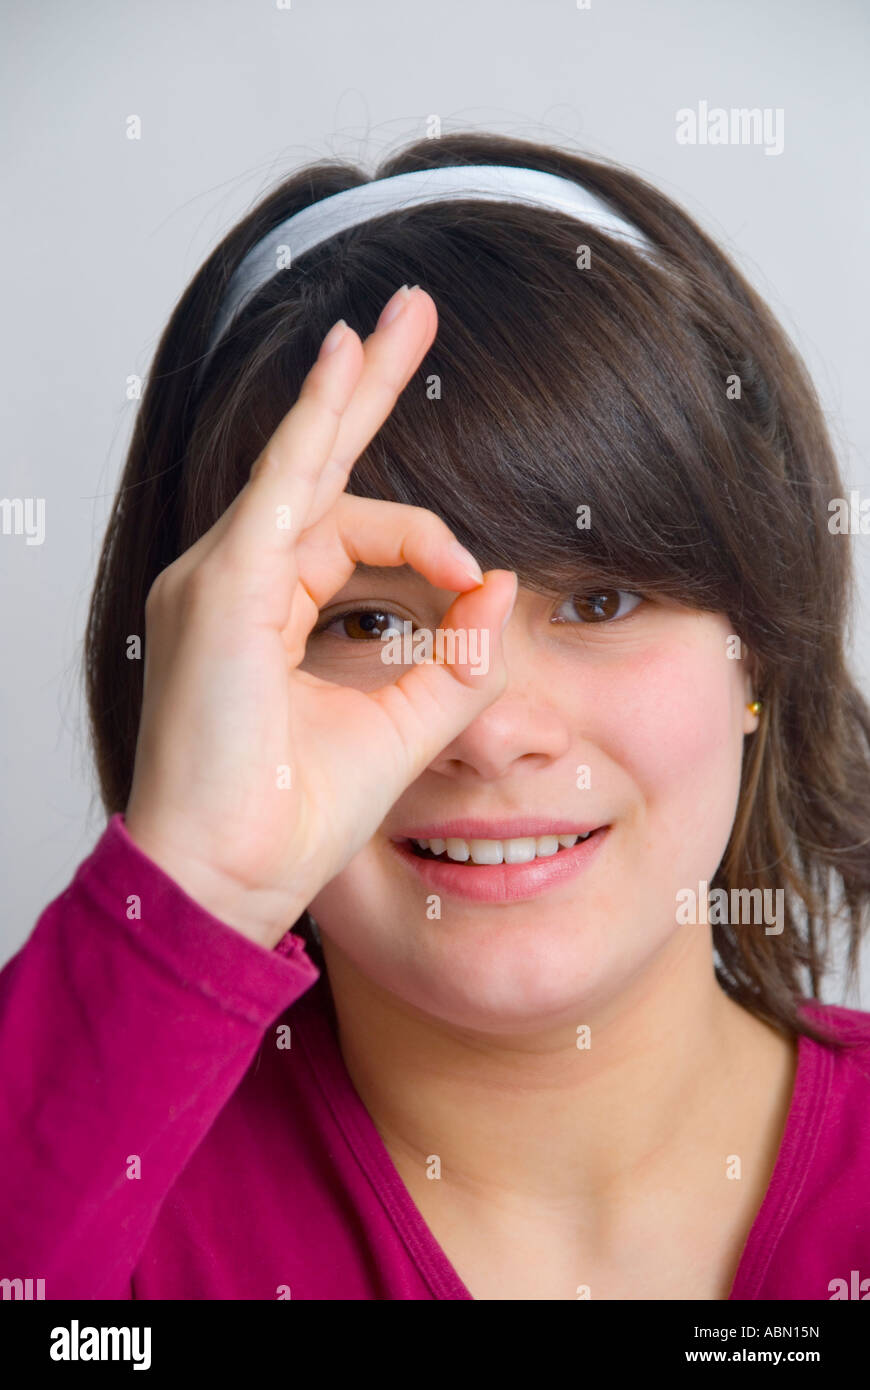 Young 11 year old girl giving the OK sign Stock Photo